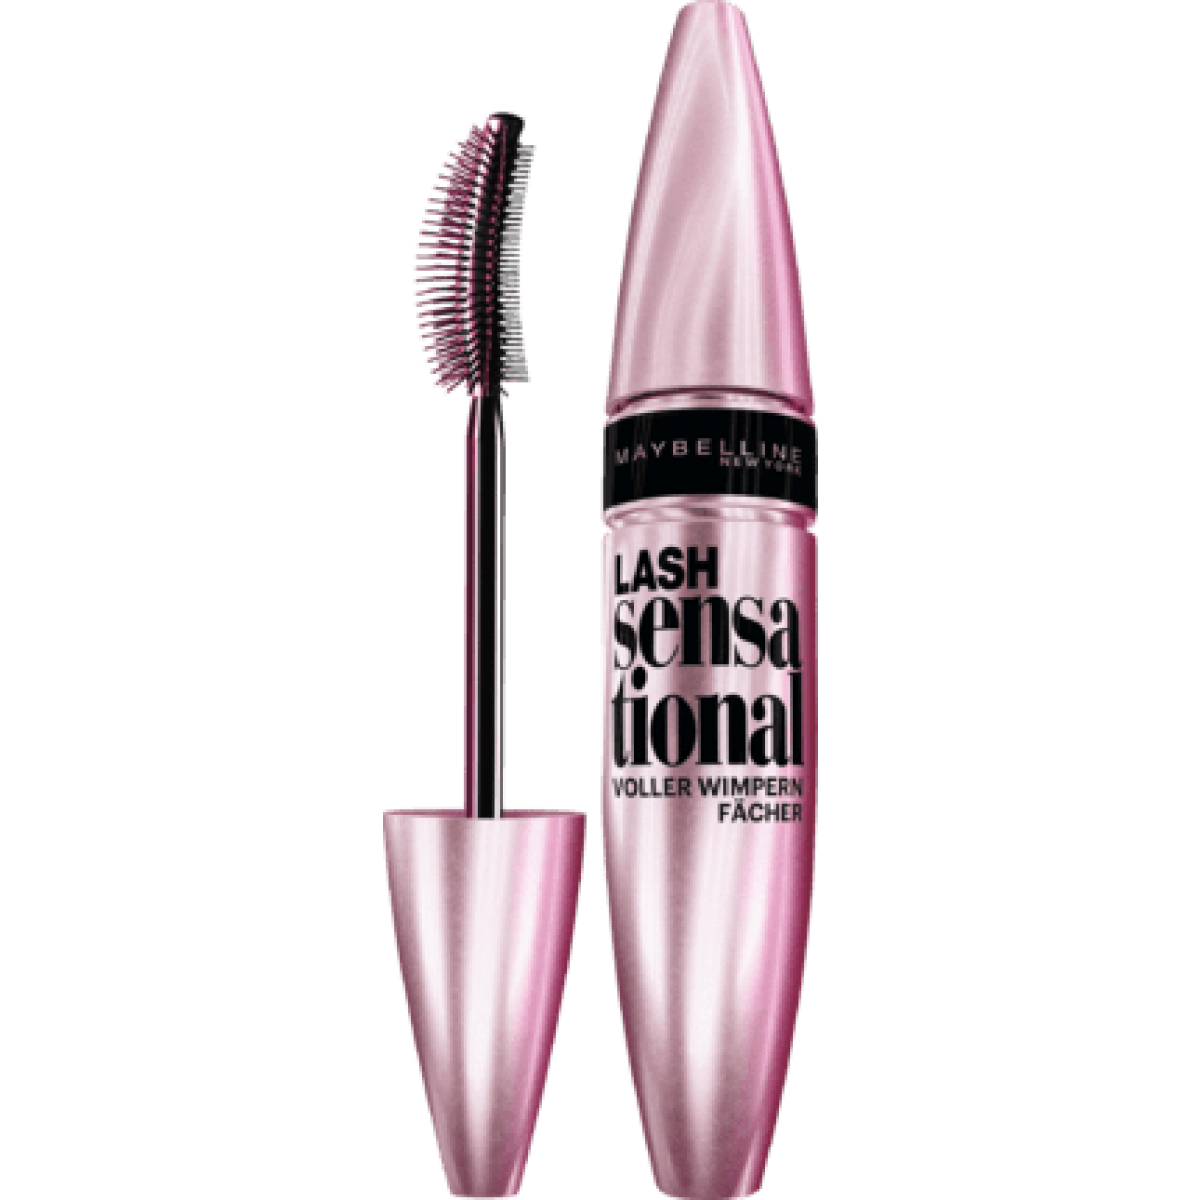 Discover an icon. This black mascara is our first Layer-Reveal brush with 6 lengths of bristles that captures the tiniest lashes you didn't know you had, volumises & defines the look of longer lashes. Result: A Layered, Multiplied Effect. Low wax formula for intense blackness without sticking lashes together. Reveals layers & layers of lashes. Gives a multiplied lash look . Volumises every layer of lashes. Layer-reveal brush captures even the tiniest of lashes. Black mascara for longer, thicker lashes. More volume, more intensity. Please note that this is german packaging.